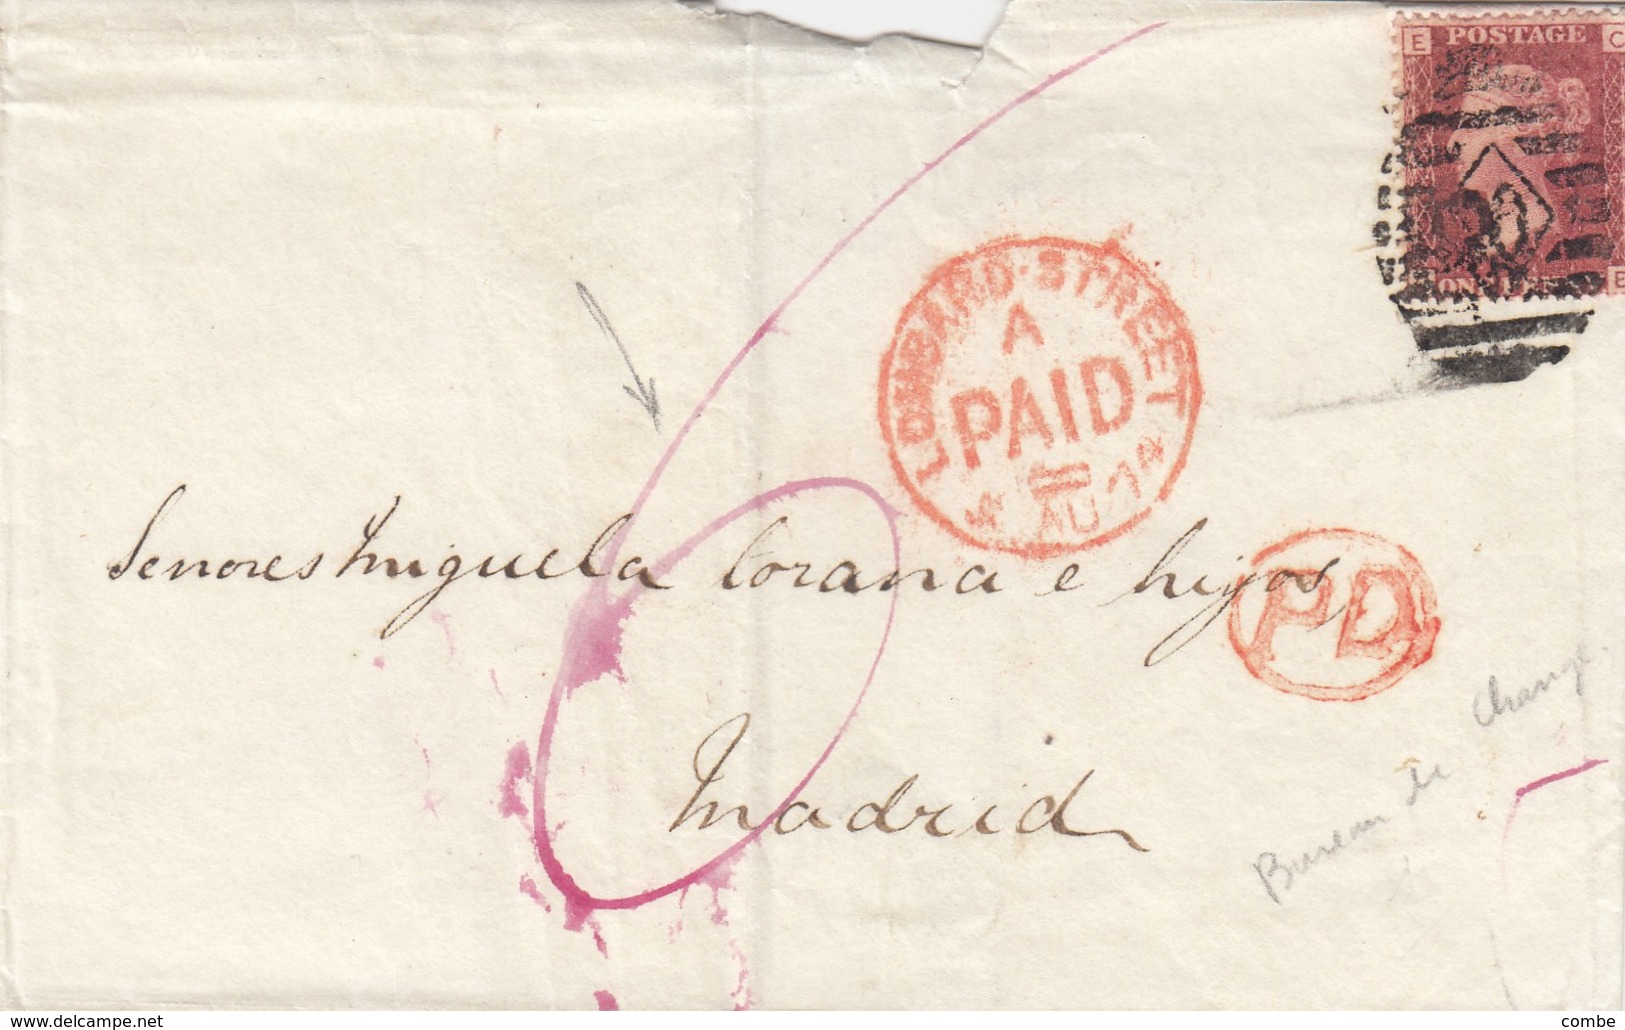 LETTRE. 5 AOUT 1874. ONE PENNY ROUGE. PAID LOMBARD STREET. PD POUR MADID ESPAGNE. ESTAFETA DE CAMBIO. TAXE 6 ROUGE - Covers & Documents